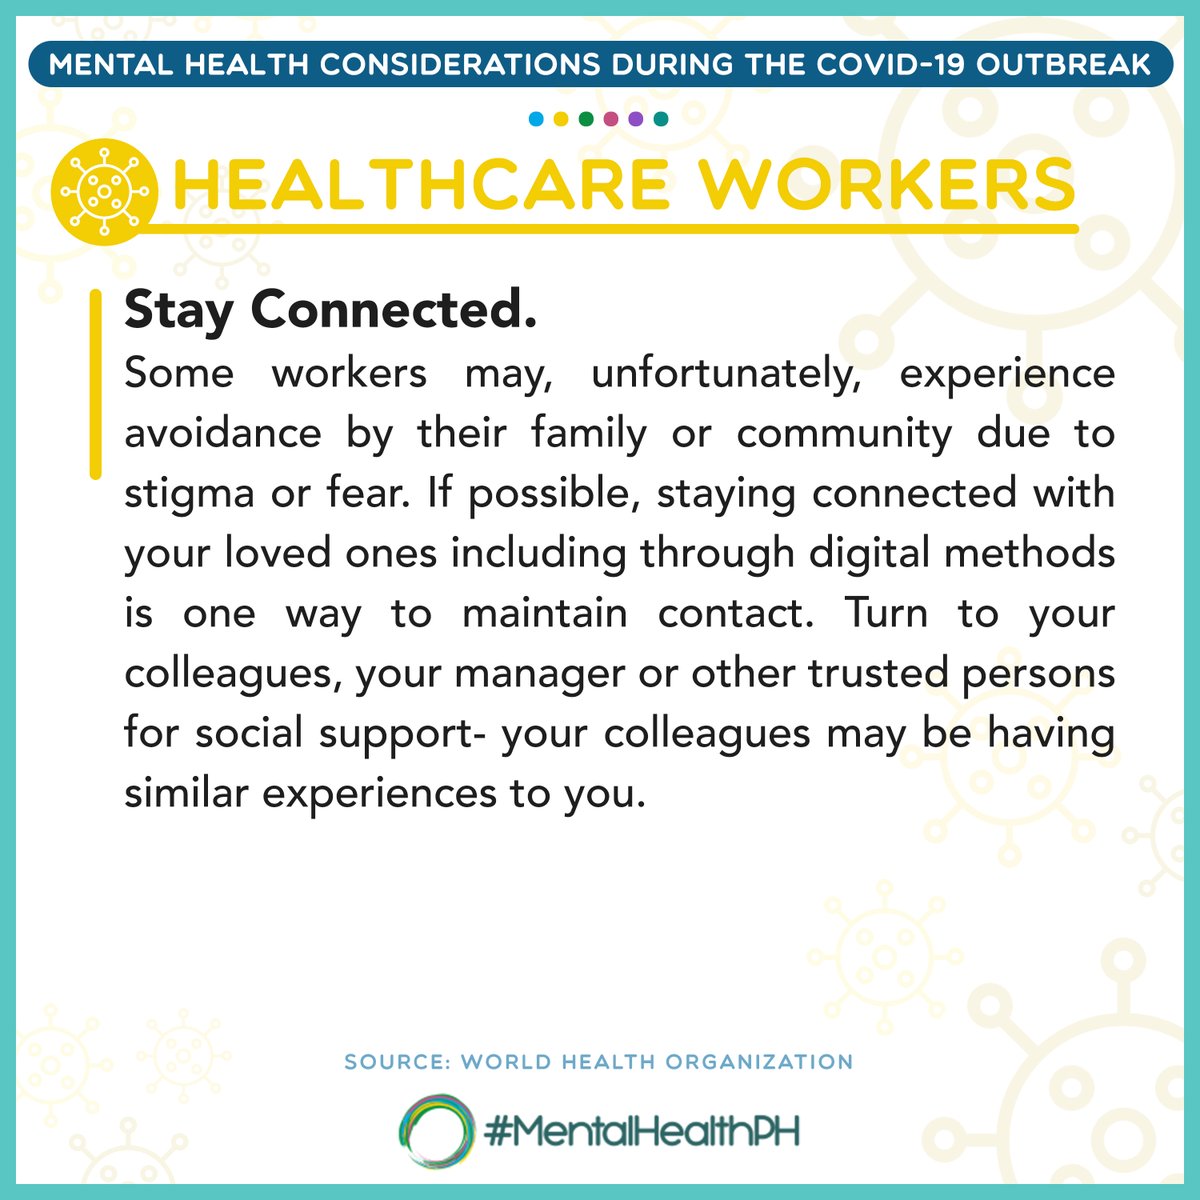 [Mental Health Considerations during COVID-19 Outbreak]For Healthcare Workers #MentalHealthPH  #COVID19(Source:  @WHO) @WHOPhilippines  @gospeakyourmind  @UnitedGMH